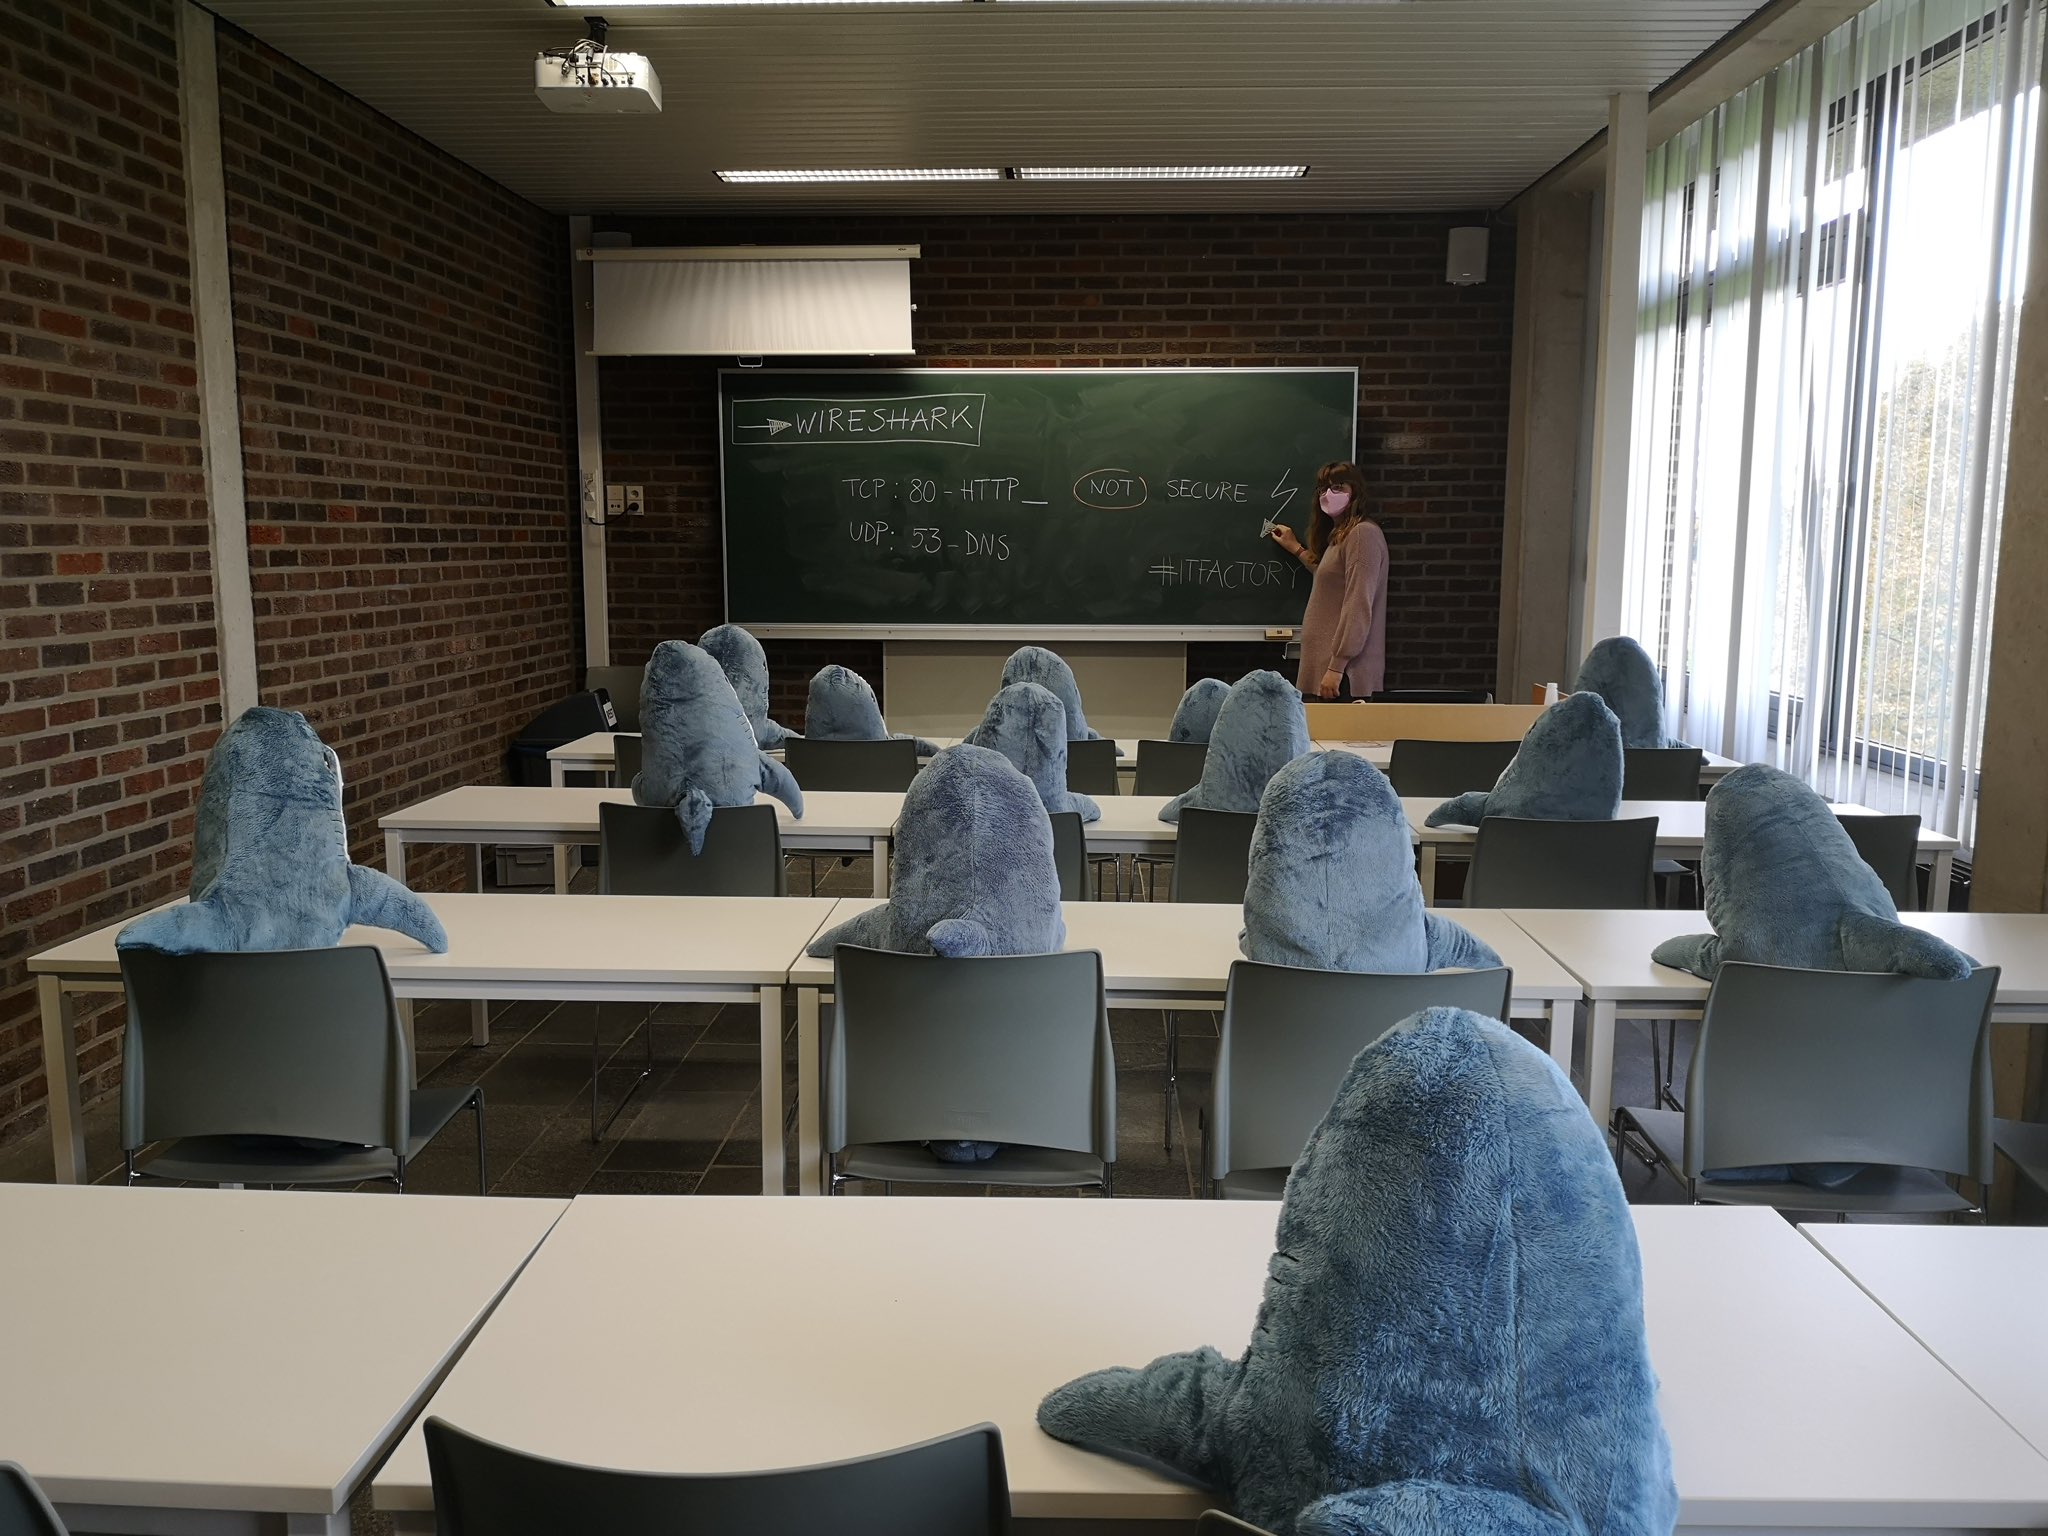 Picture of a classroom with the teacher addressing a room full of plush shark toys